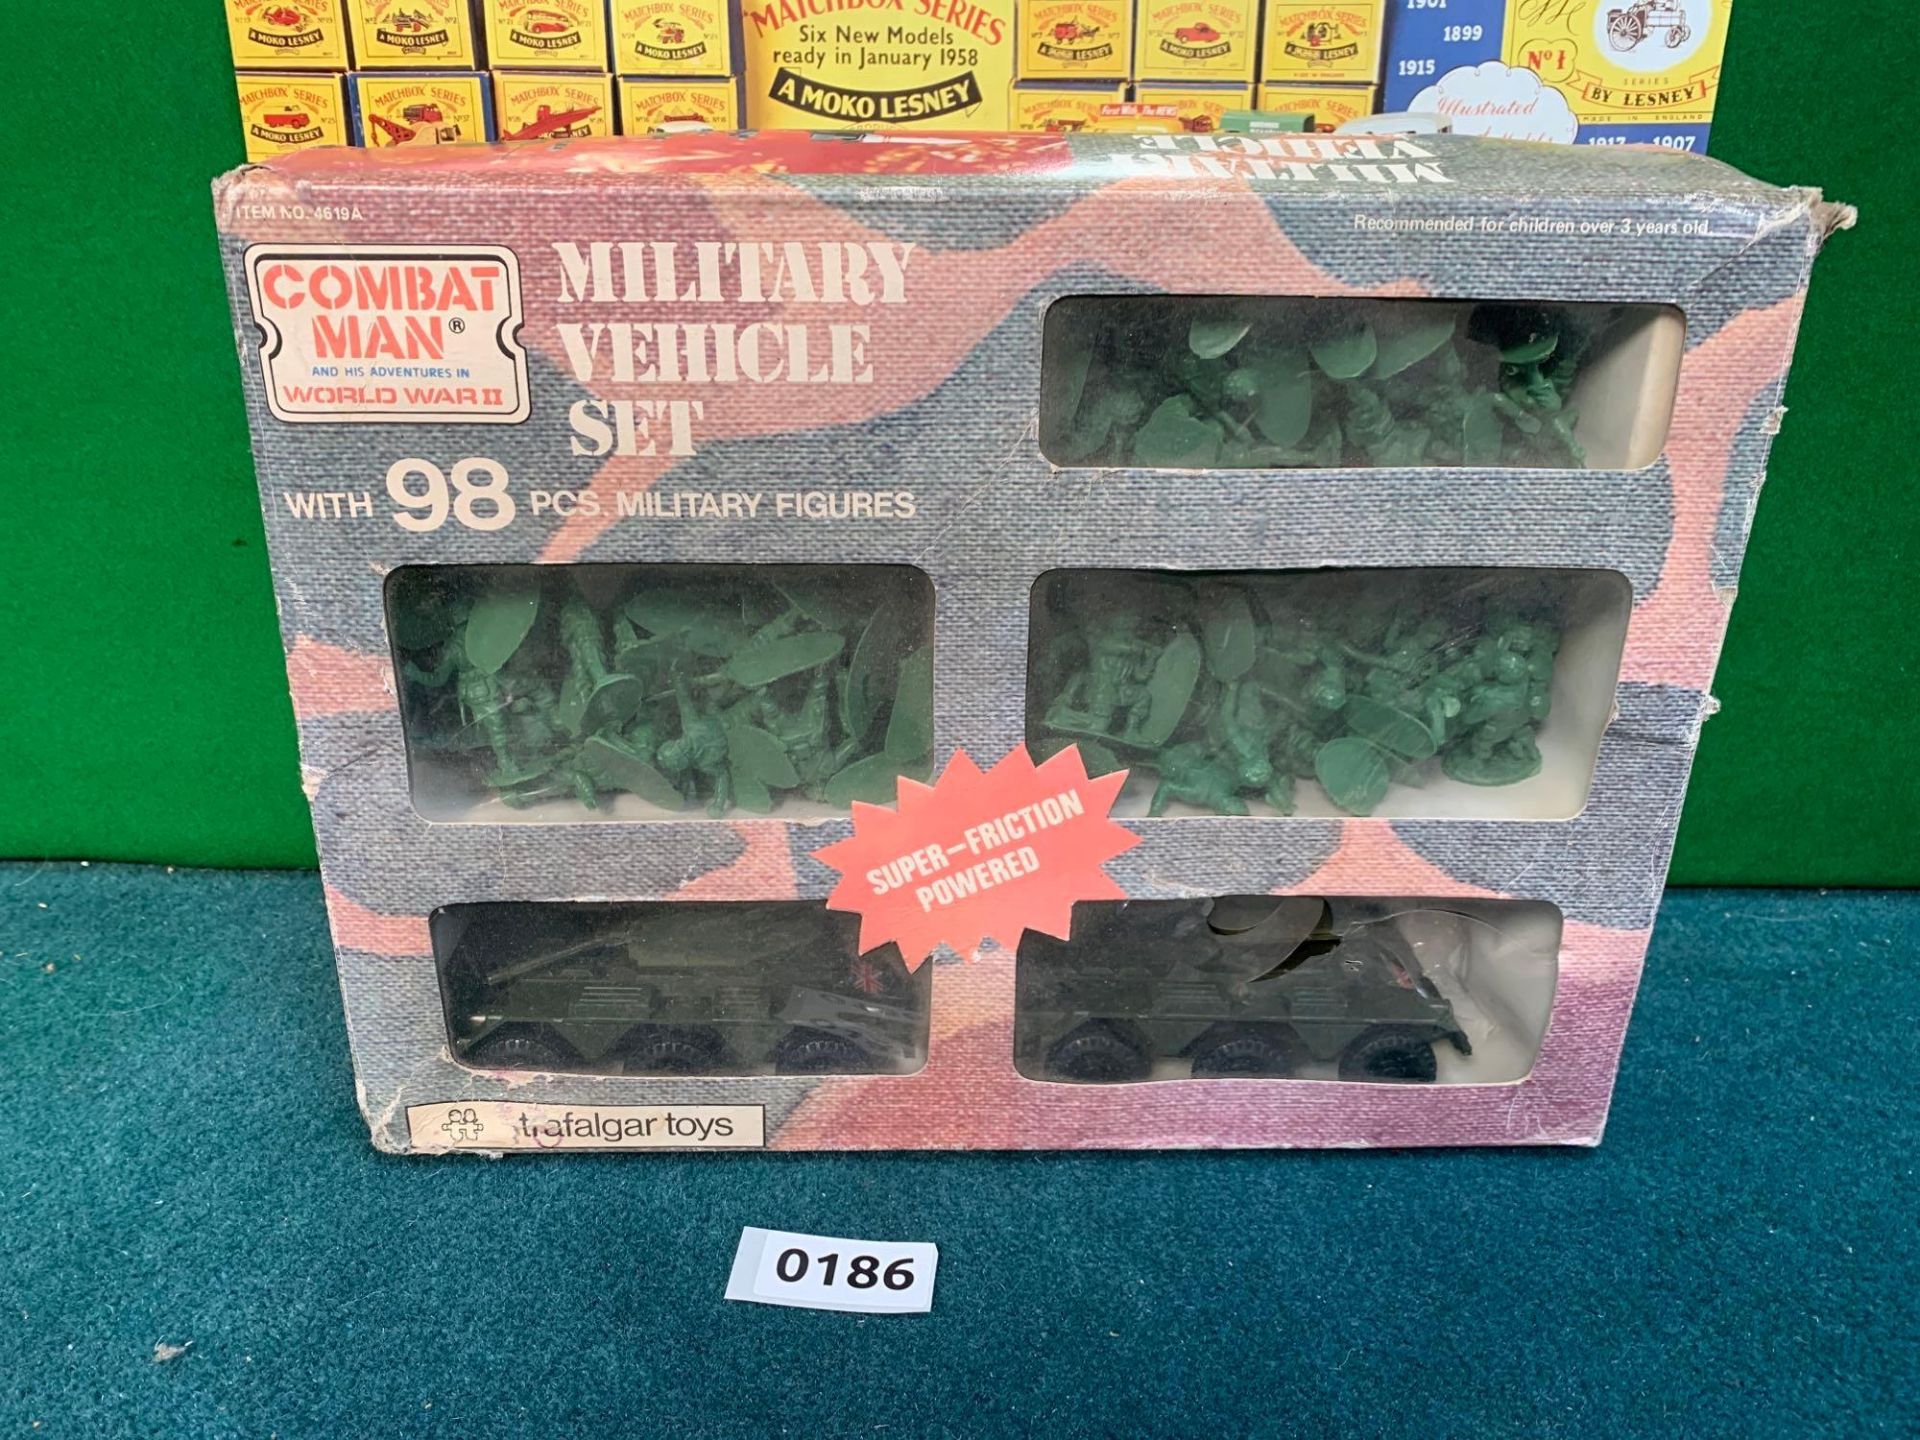 Combat Man Military Vehicle Set With 98 Pieces By Trafalgar Toys